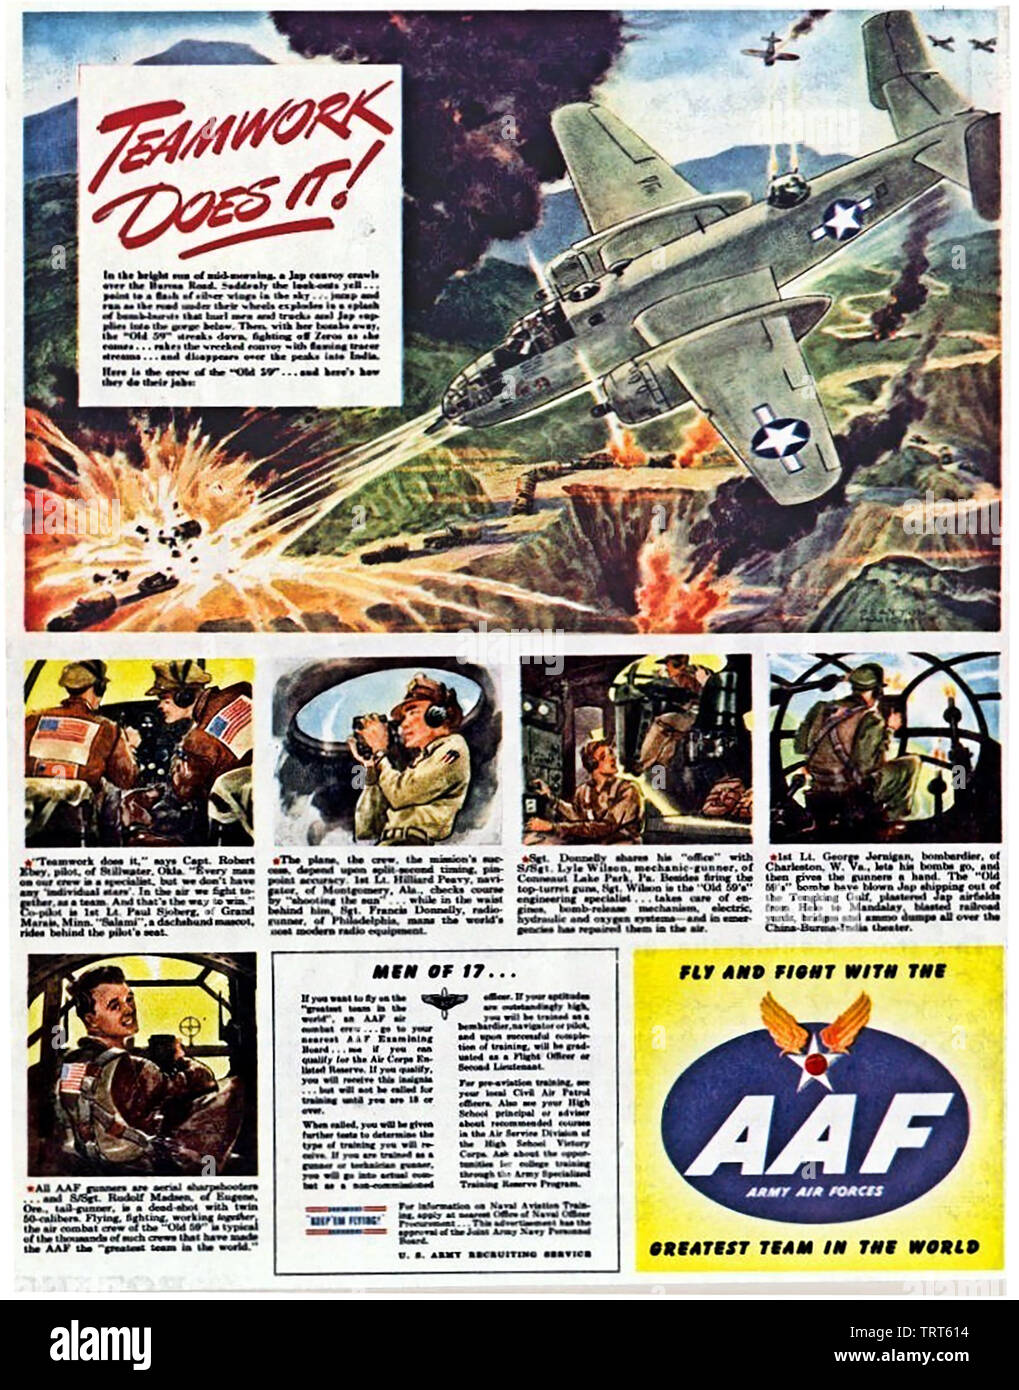 AMERICAN AIRFORCE RECRUITING POSTER su 1944 Foto Stock